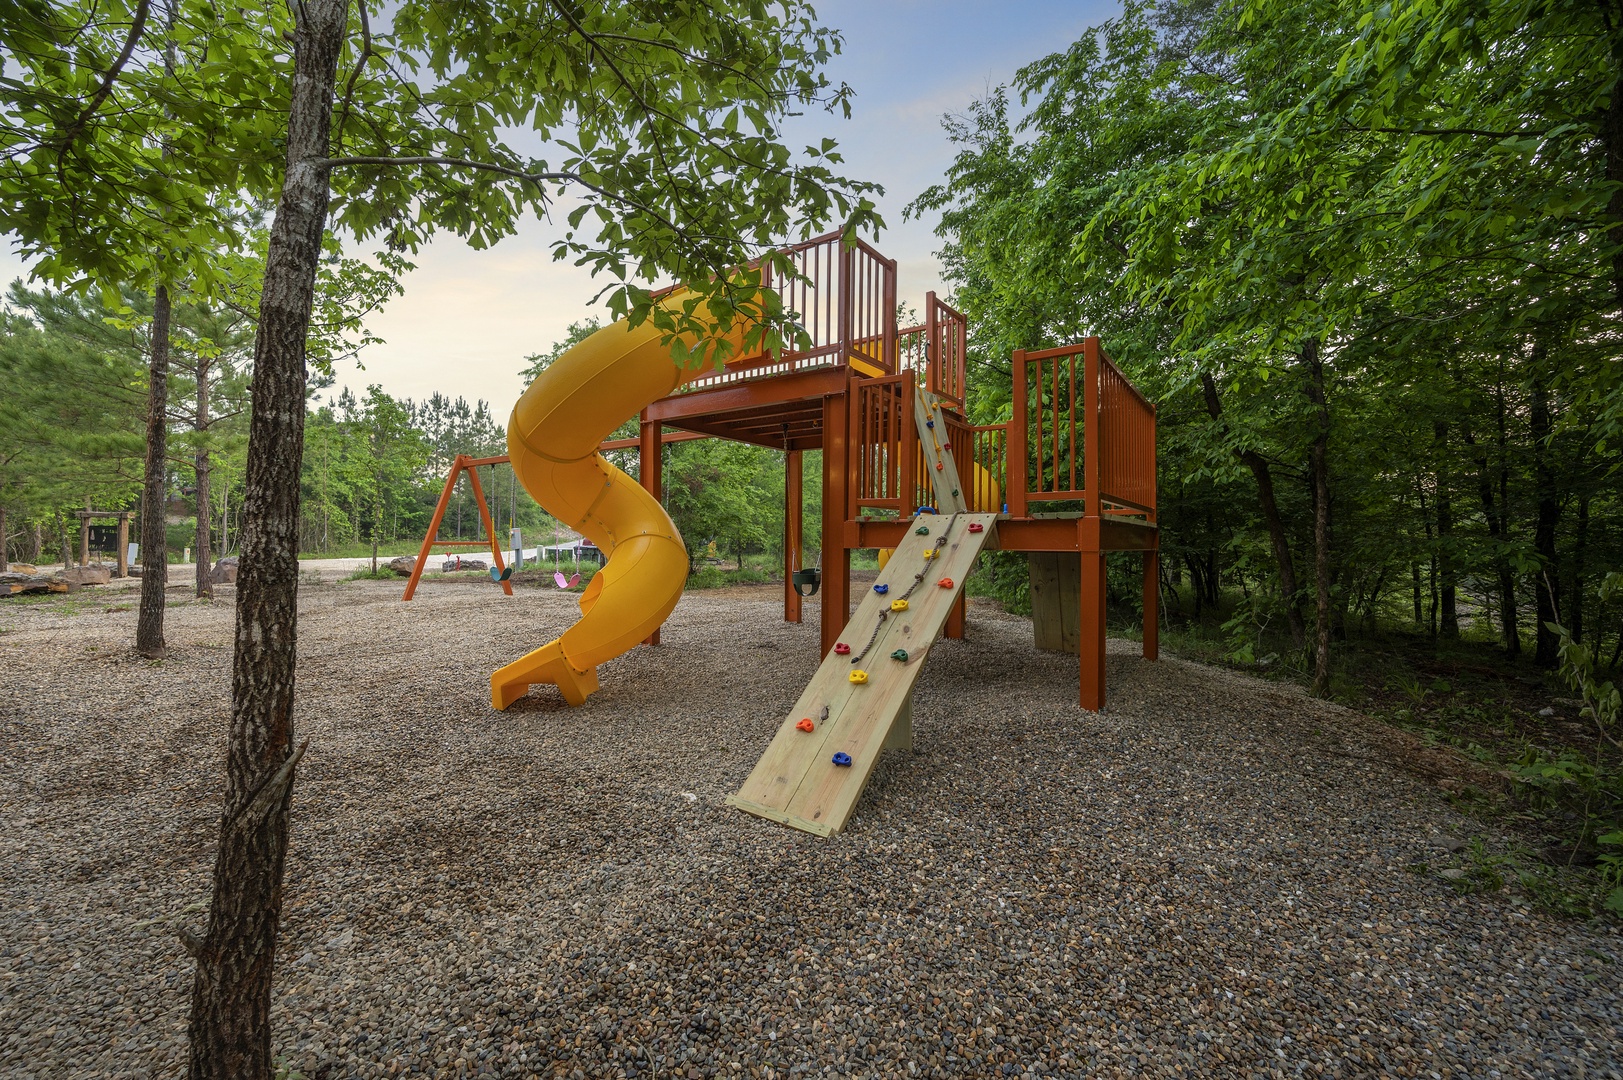 Custom playset with two slides, swings, and rock climbing